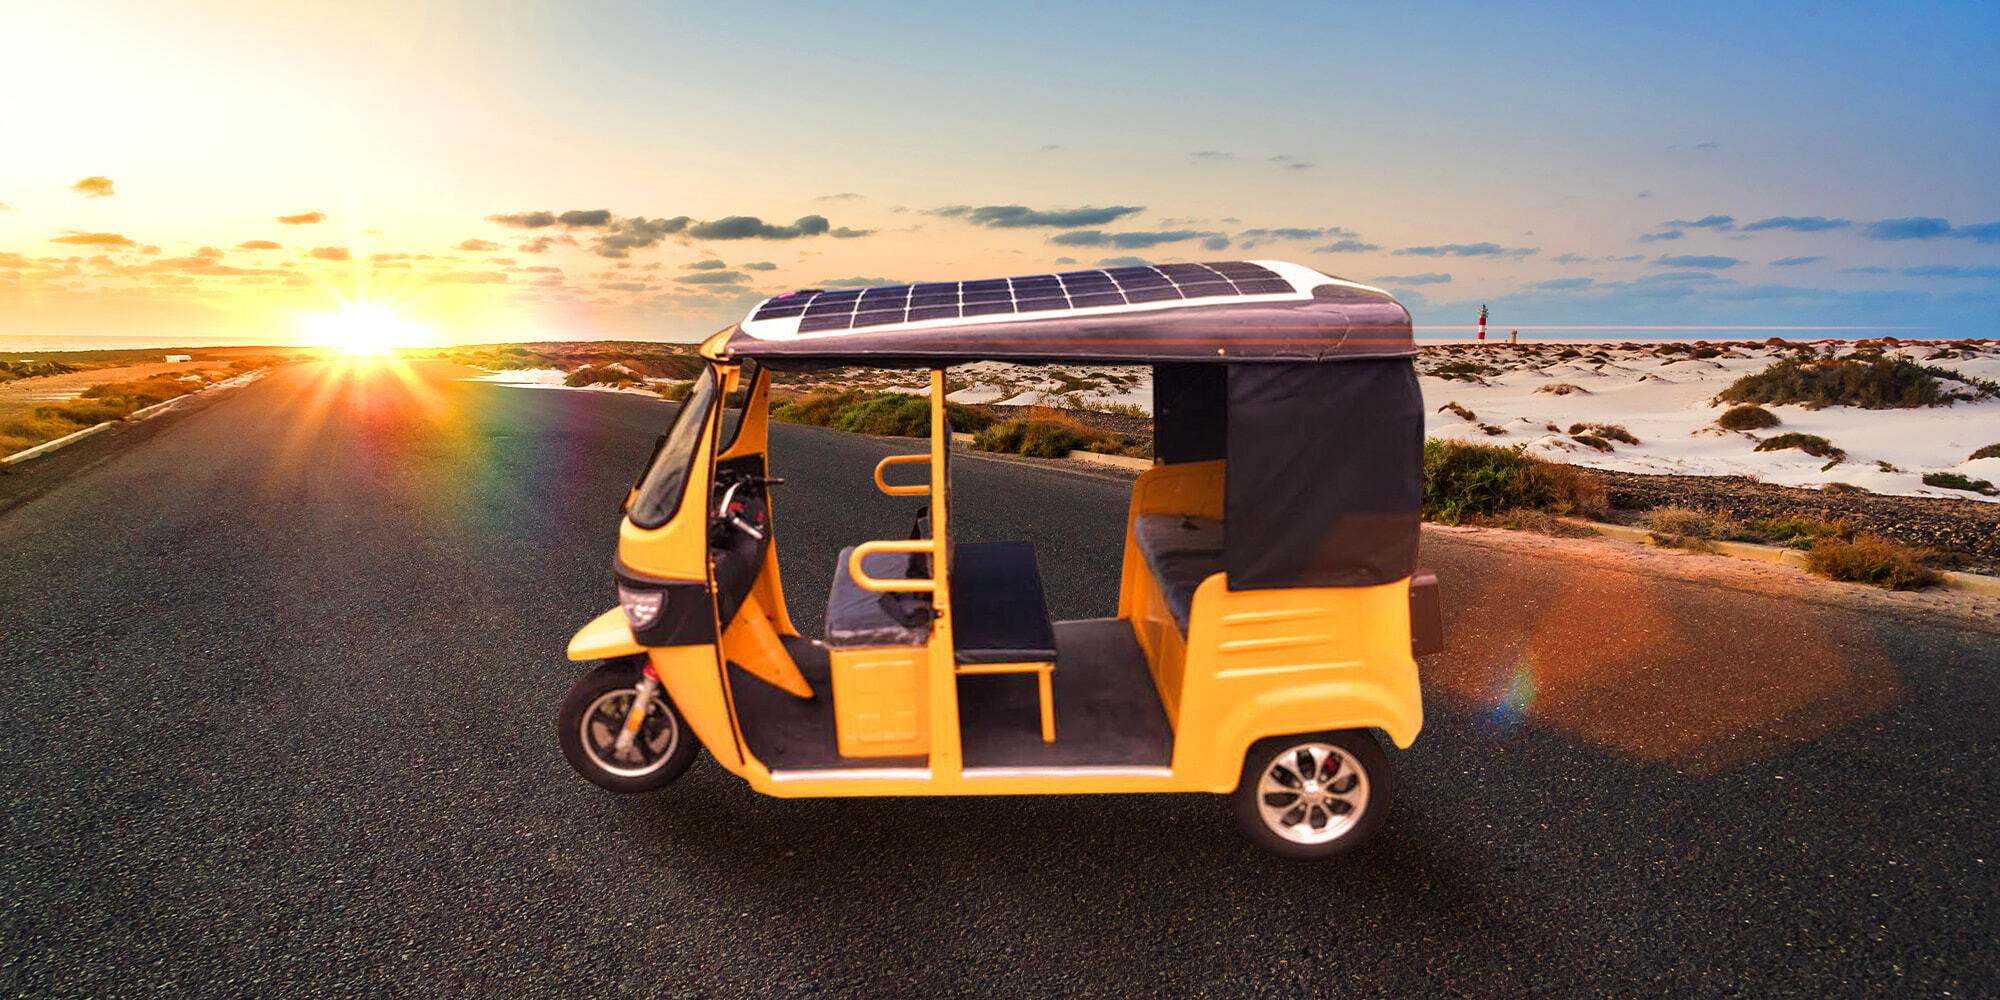 Awesomely Weird Alibaba EV of the Week Solarpowered electric tuktuk